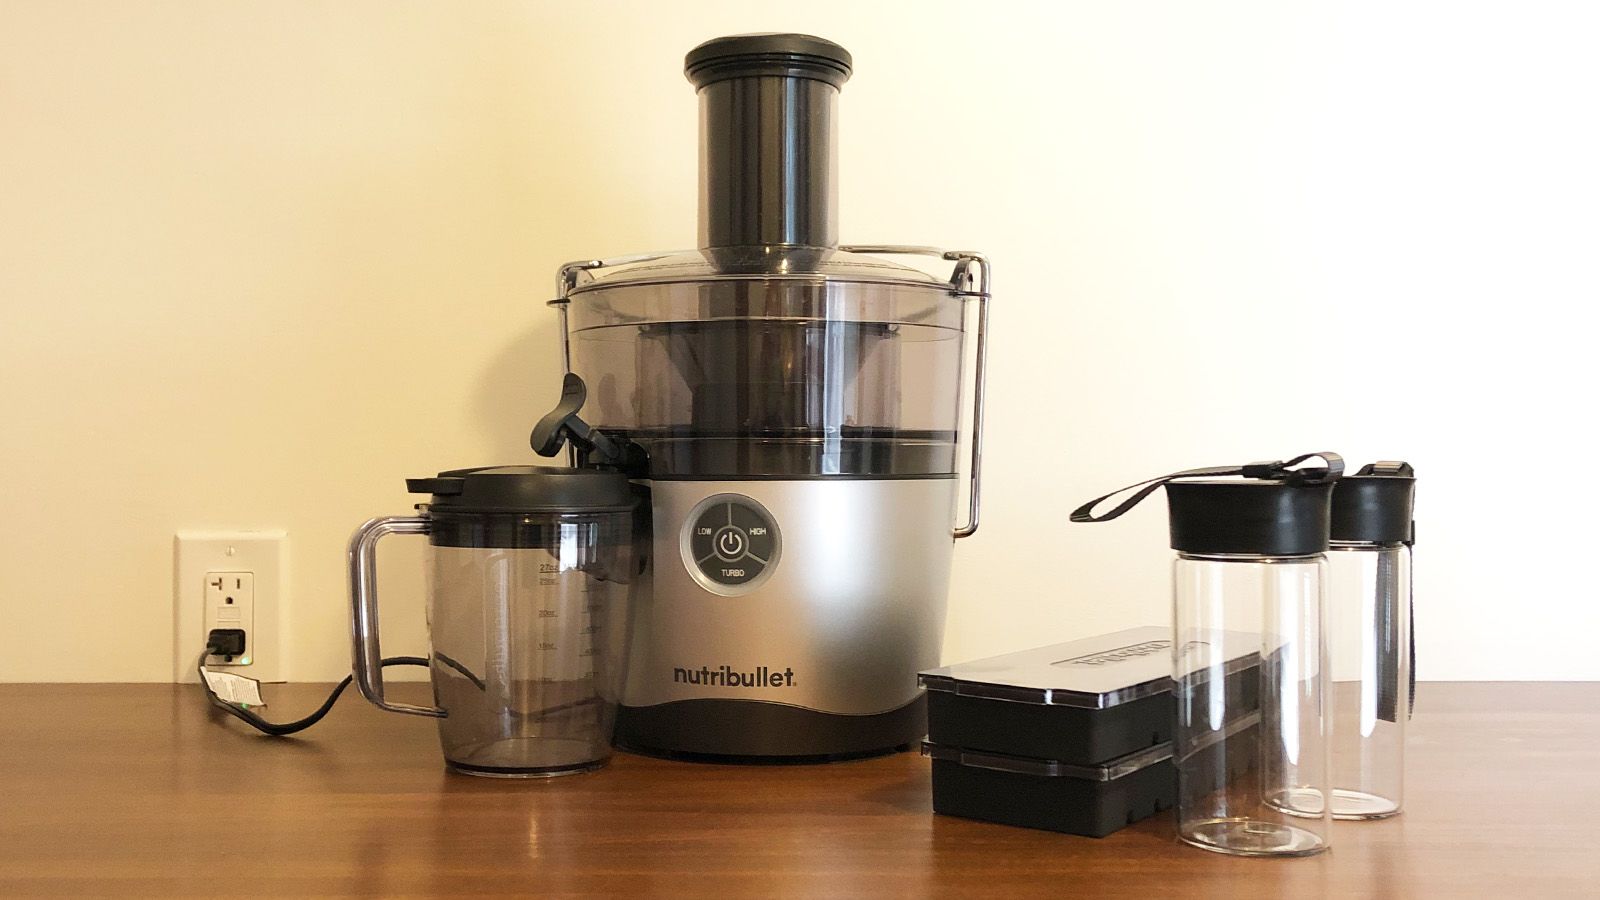 Juicing dual: Is the Ninja Cold Press Juicer or the Nutribullet